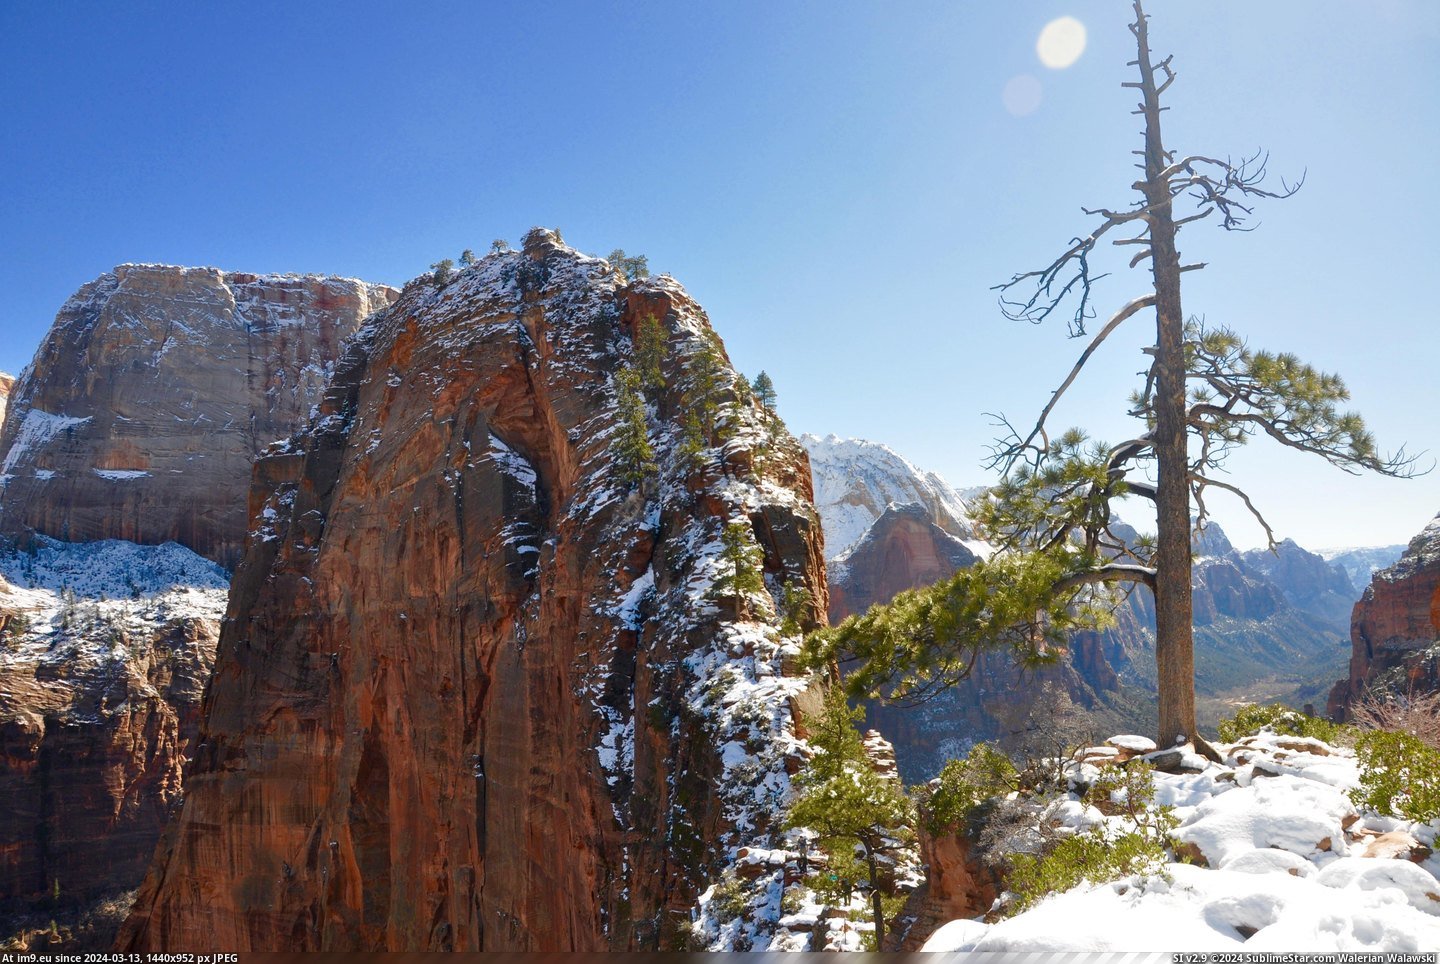 #Park #National #Zion #4288x2848 #Angel #Landing [Earthporn] Summiting a snowcapped Angel's Landing in Zion National Park, UT [4288x2848] Pic. (Изображение из альбом My r/EARTHPORN favs))